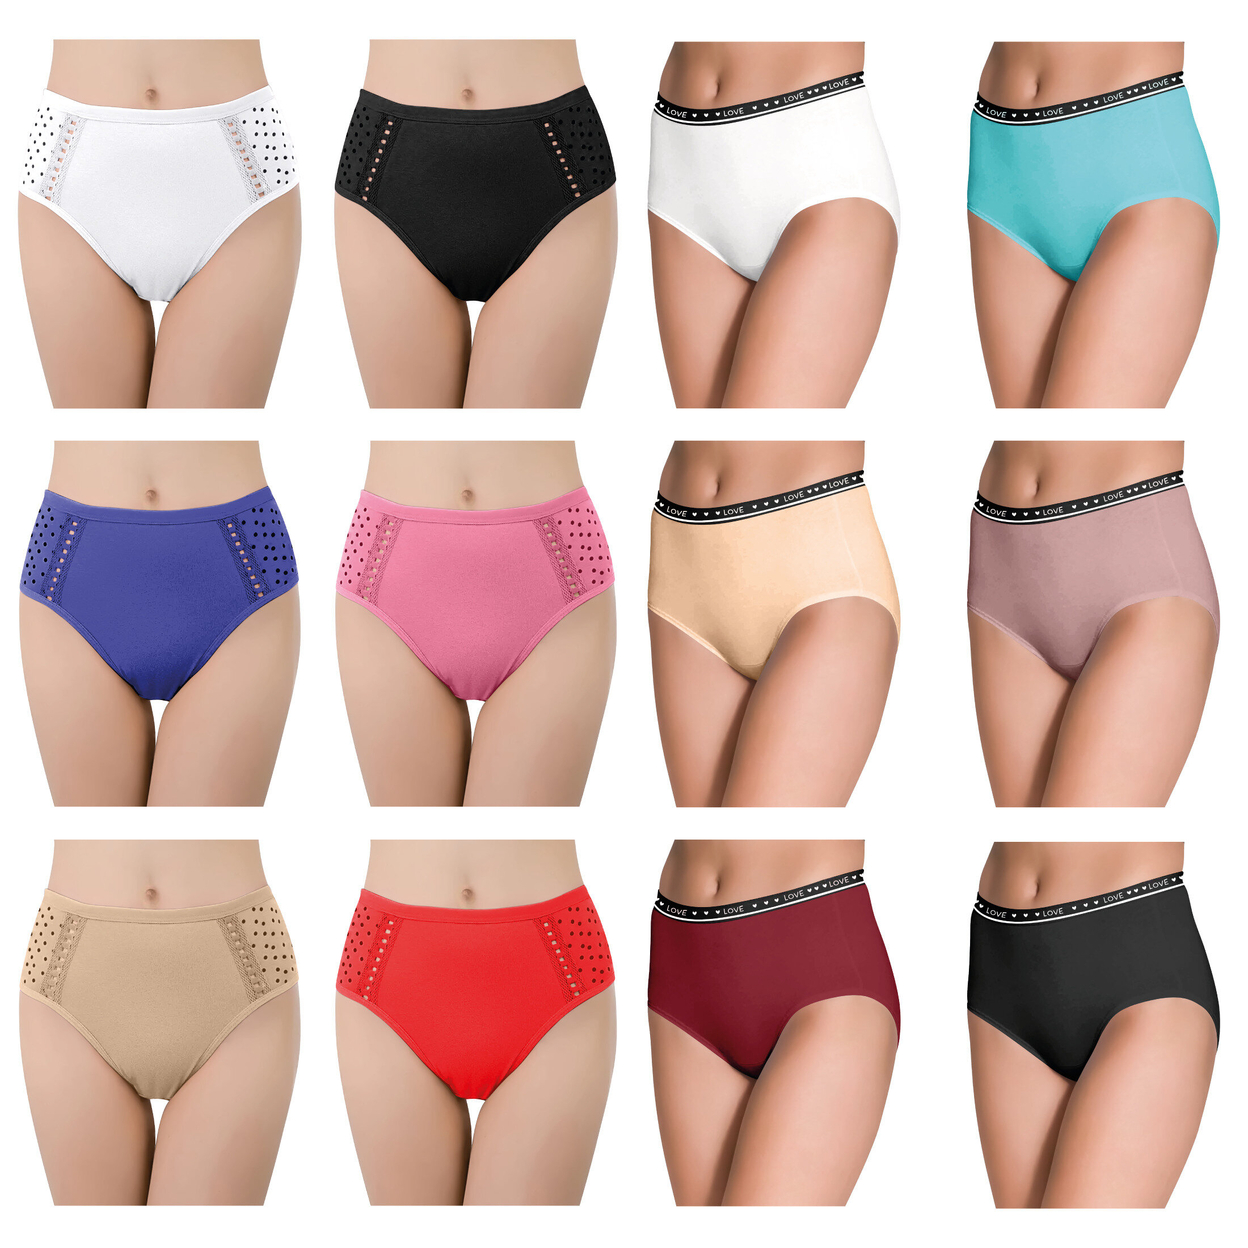 6-Pack: Women's Ultra Soft Moisture Wicking Panties Cotton Perfect Fit Underwear (Plus Sizes Available) - Xx-large